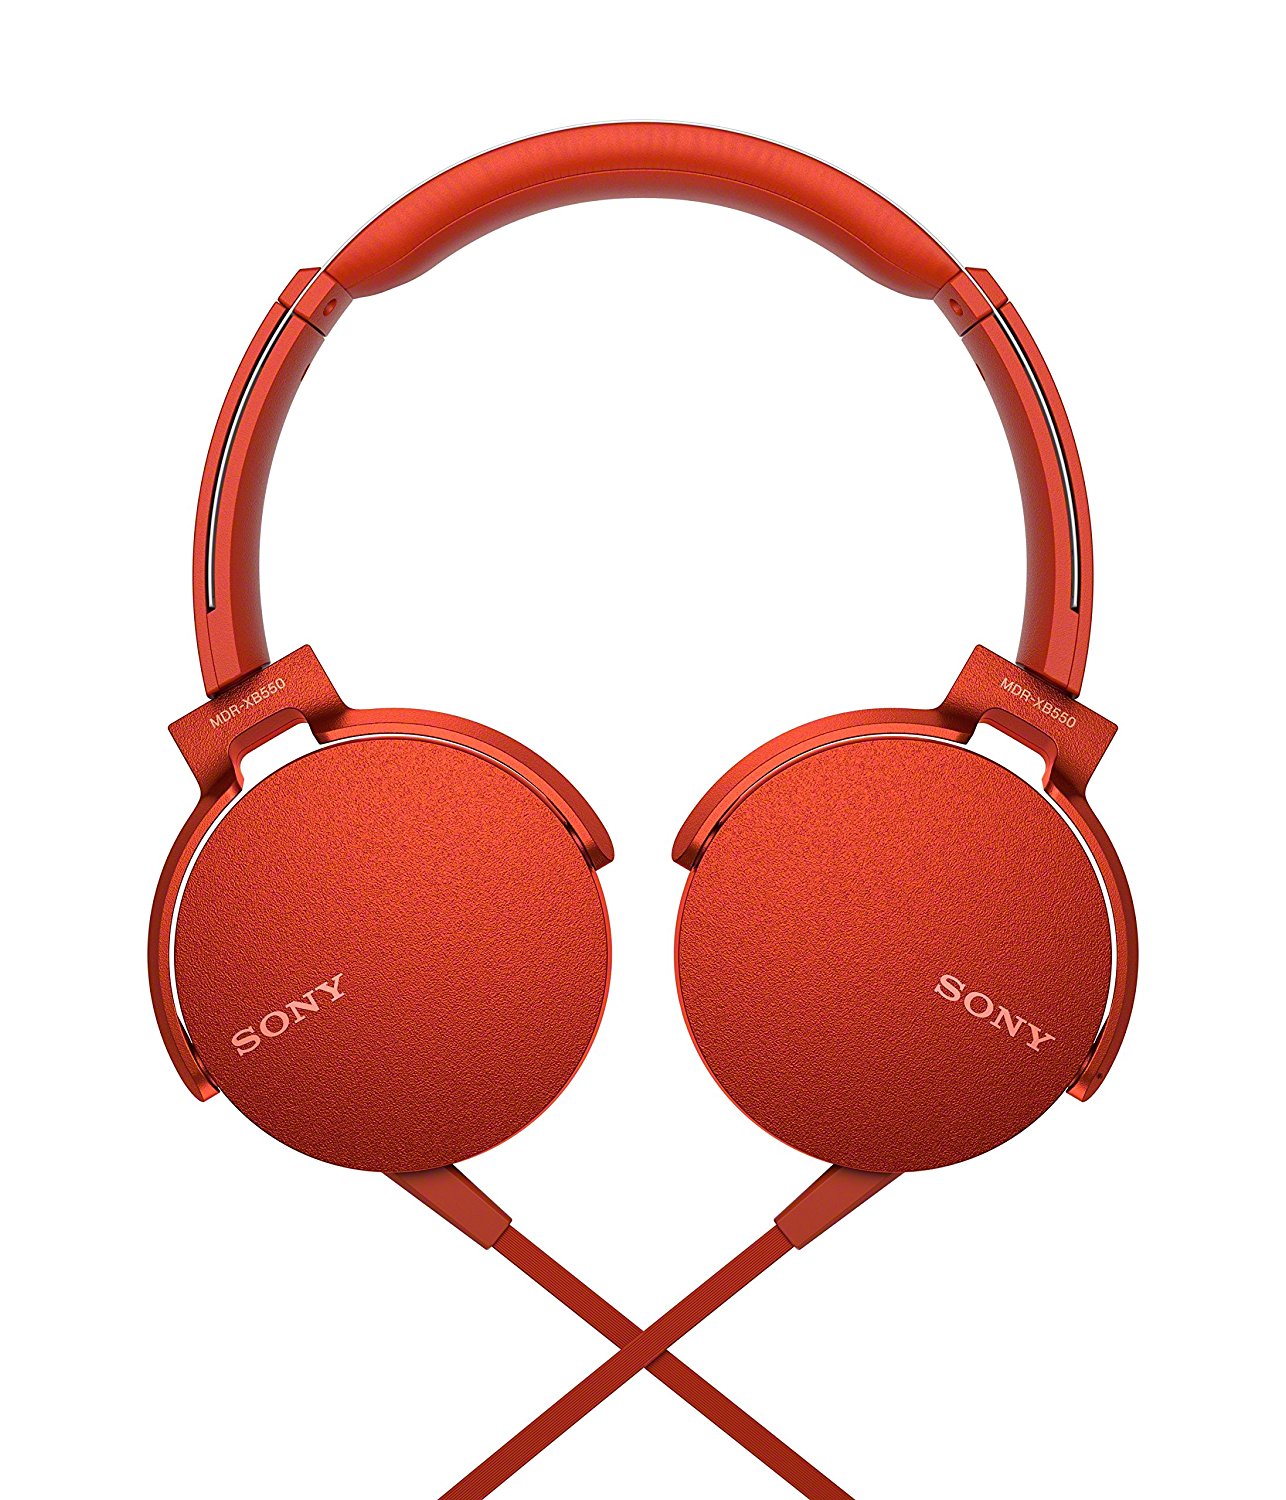 Sony MDR-XB550AP - Headphones with mic - on-ear - 3.5 mm jack - red